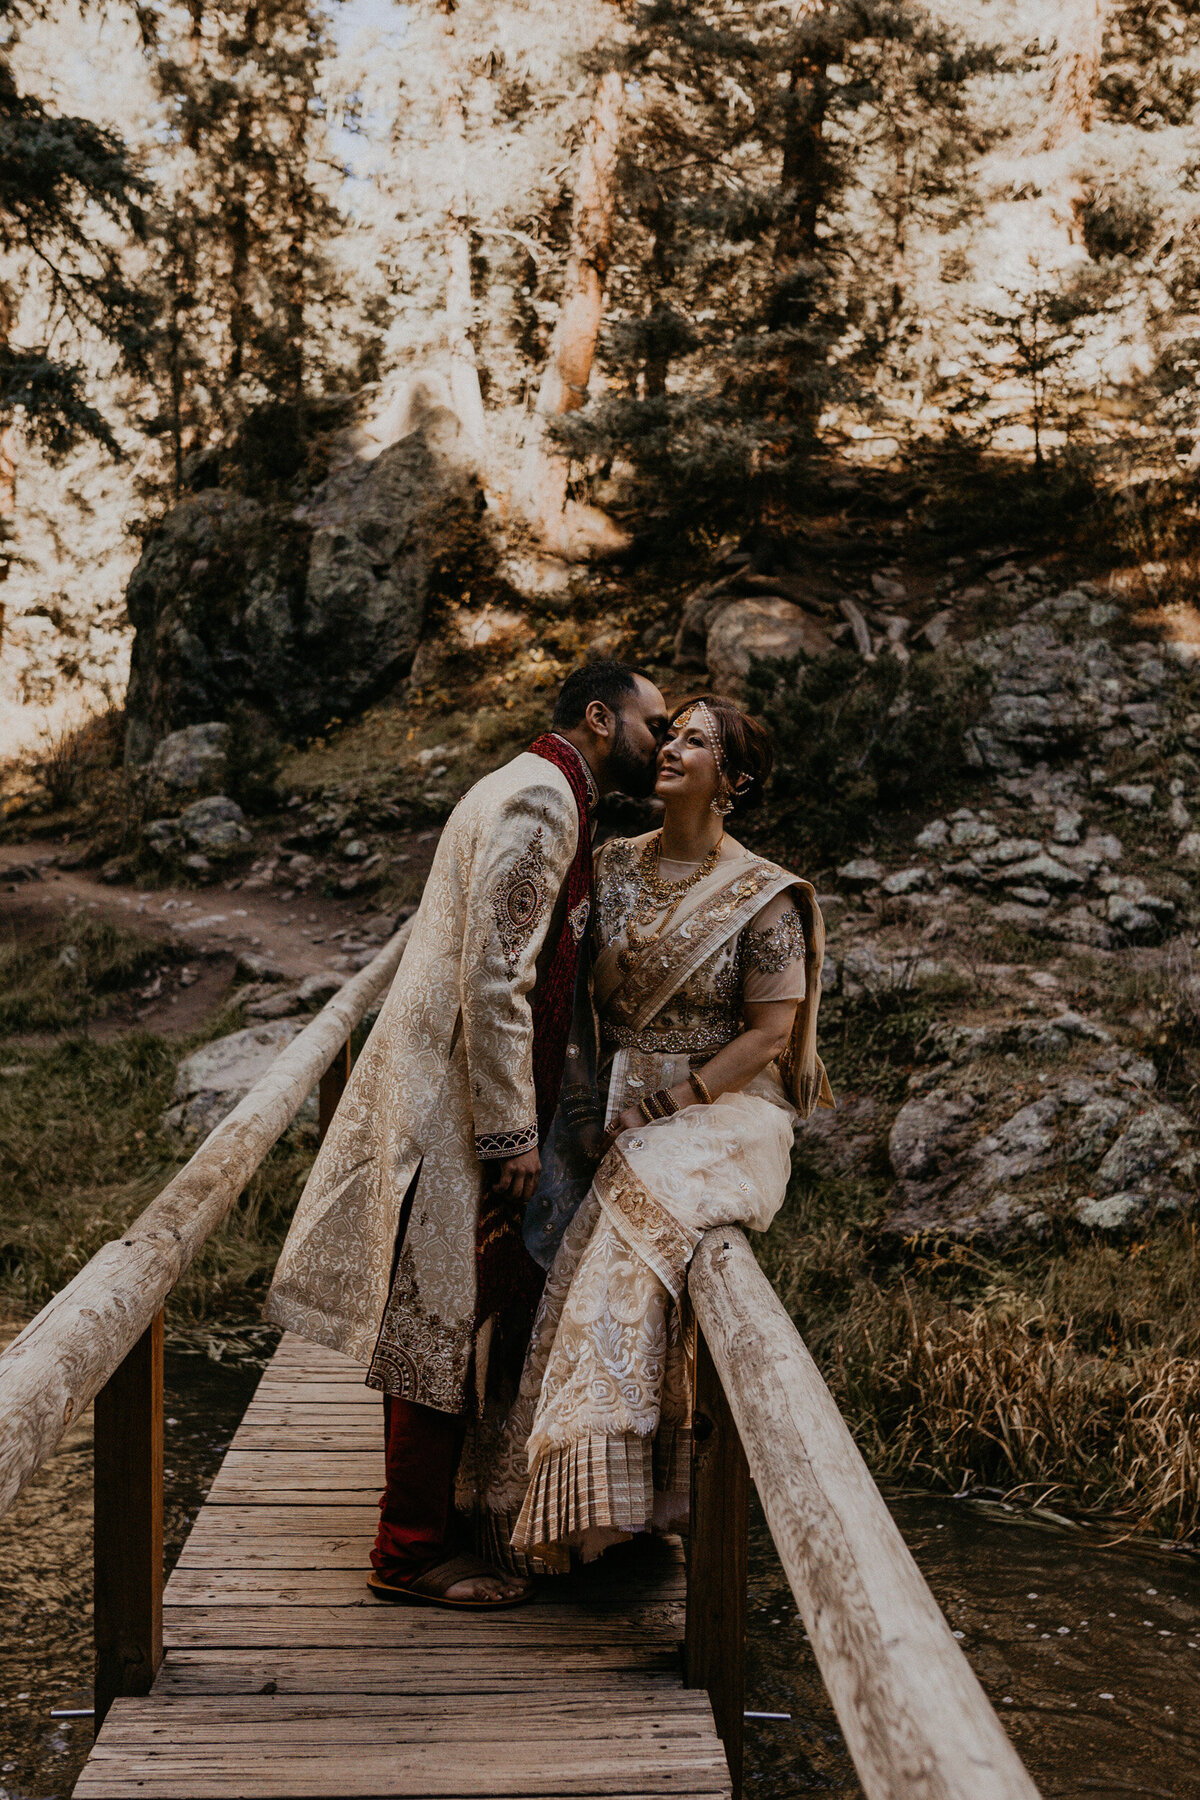 bride and groom in Indian attire on a bridge